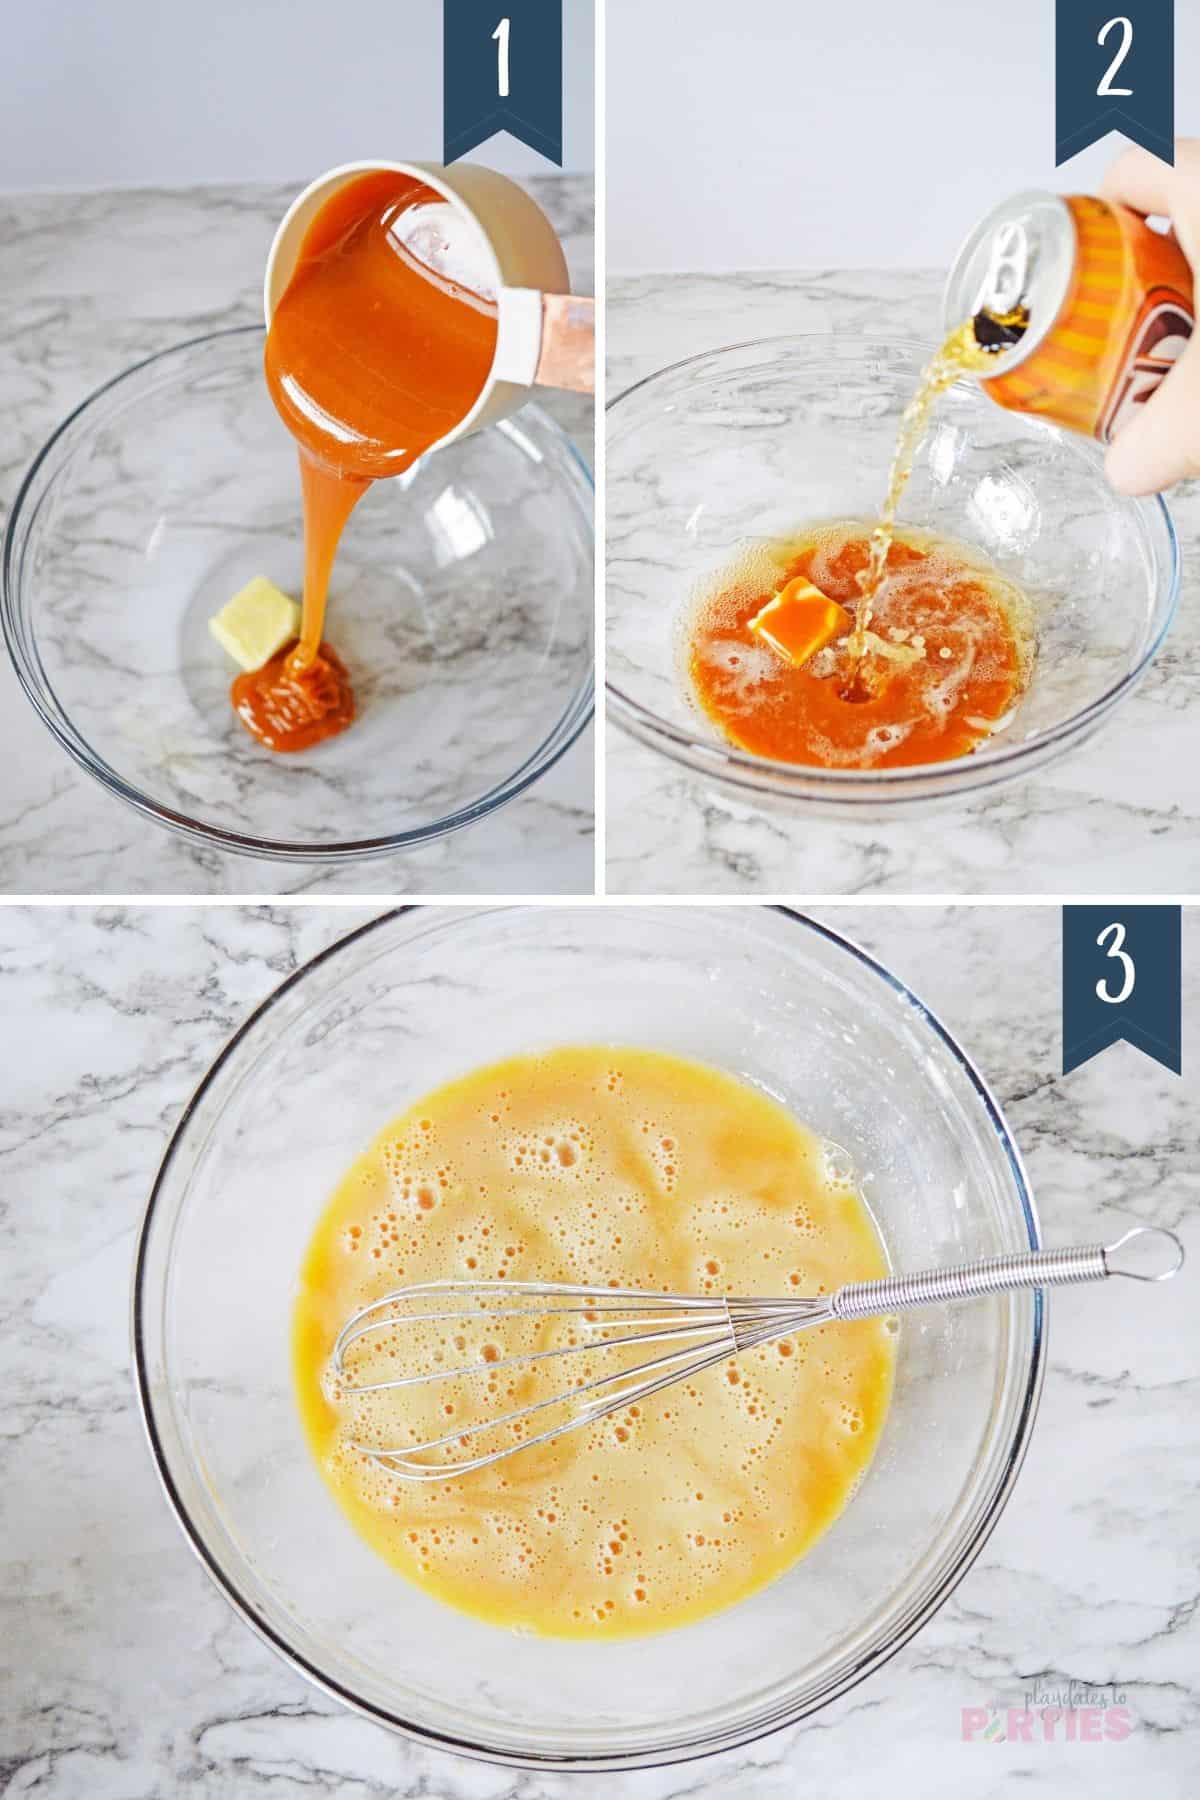 Collage of photos showing recipe for Butterbeer Steps 1-3.